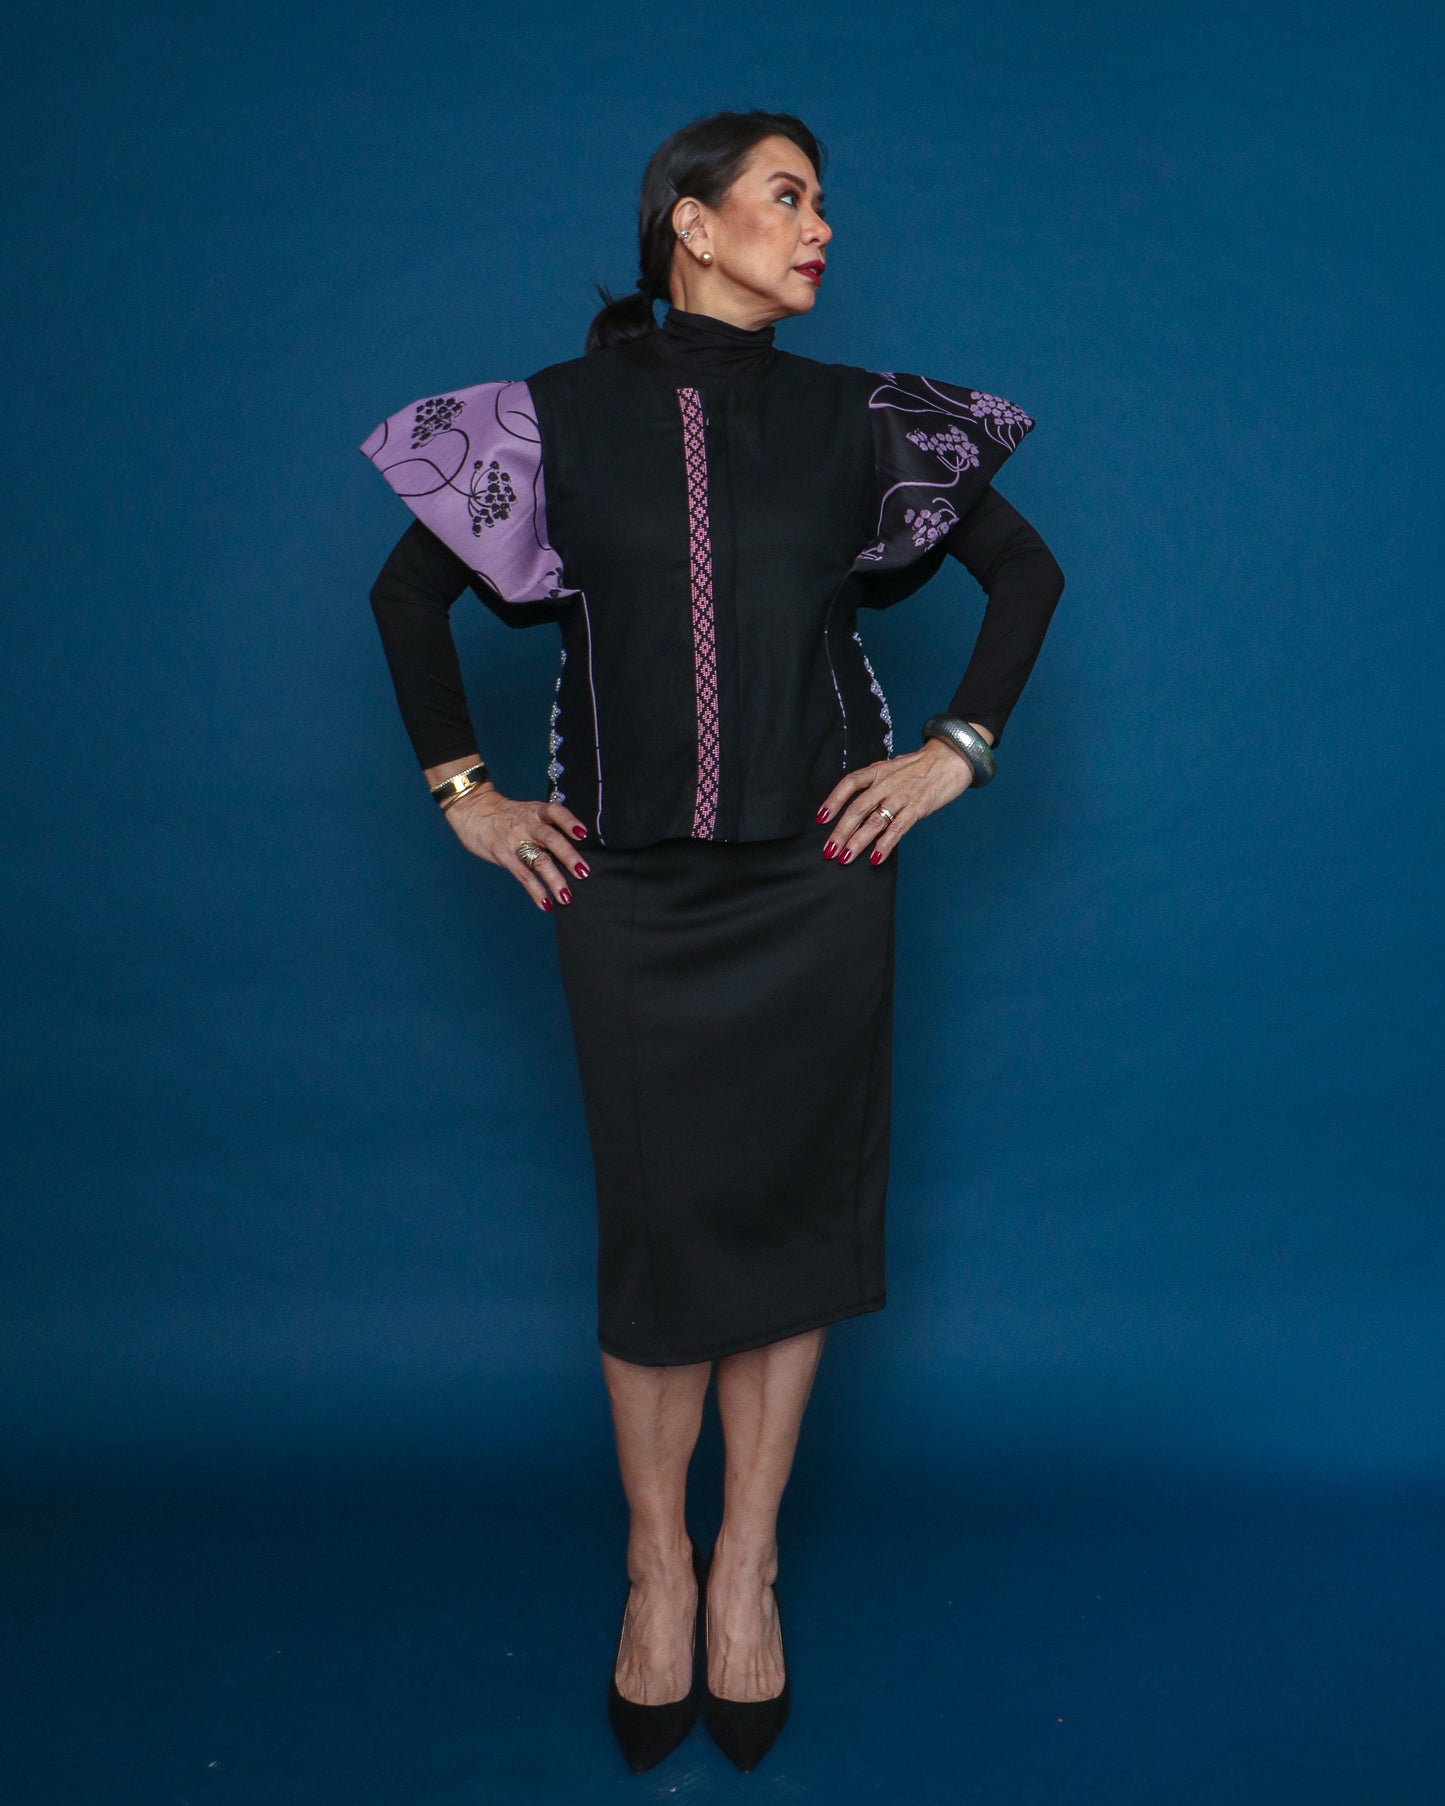 Heir to the Throne Puffed Sleeves Jacket in Black Lilac Langkit of Marawi